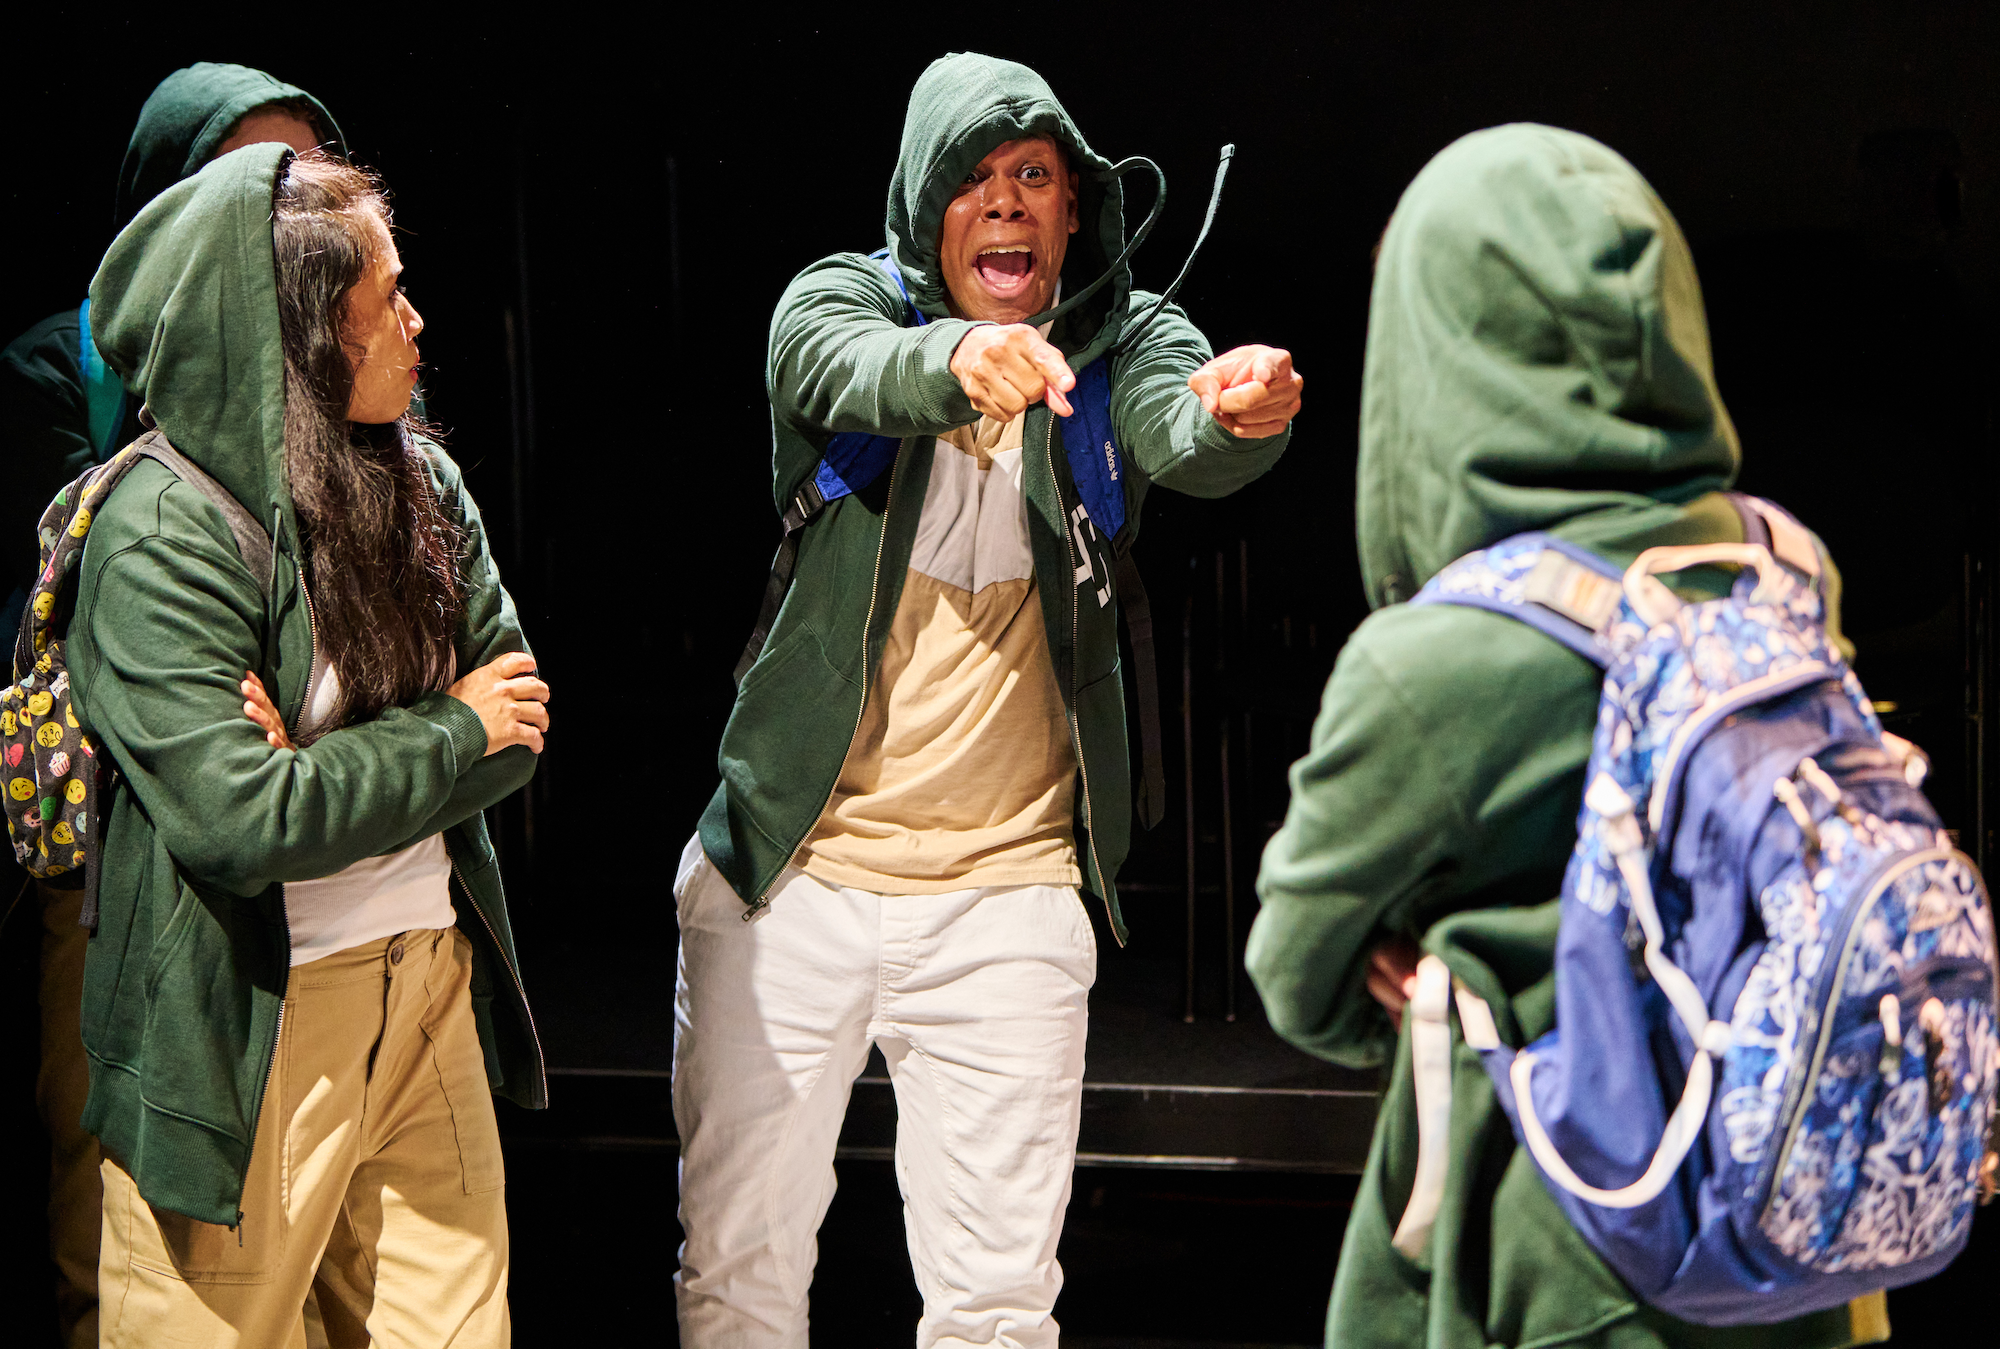 Four cast members on stage all wearing dark green hoodies and backpacks. One cast member is pointing at another with both hands and has a serious and upset look on his face. Another cast member with long hair and arms folded looks on.